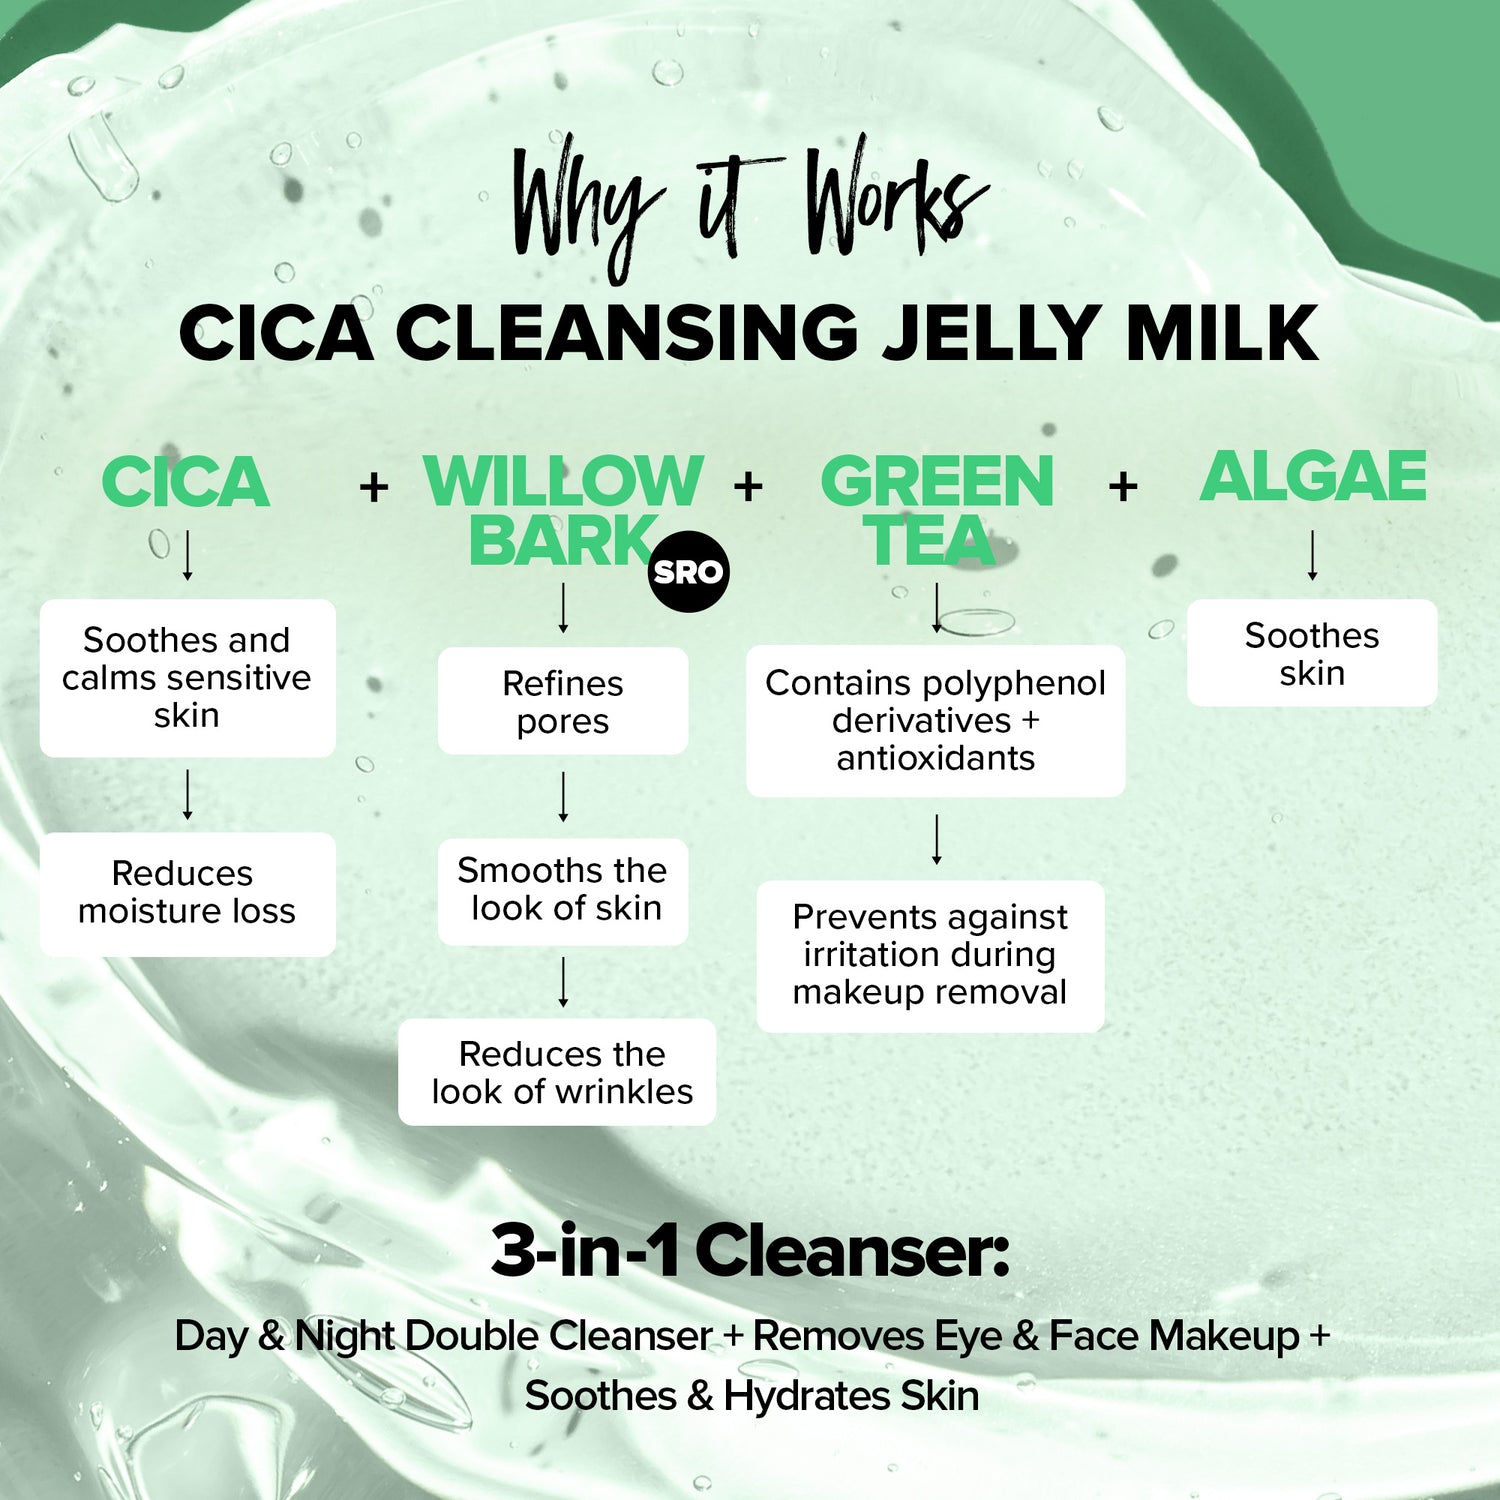 CICA CLEANSING JELLY MILK